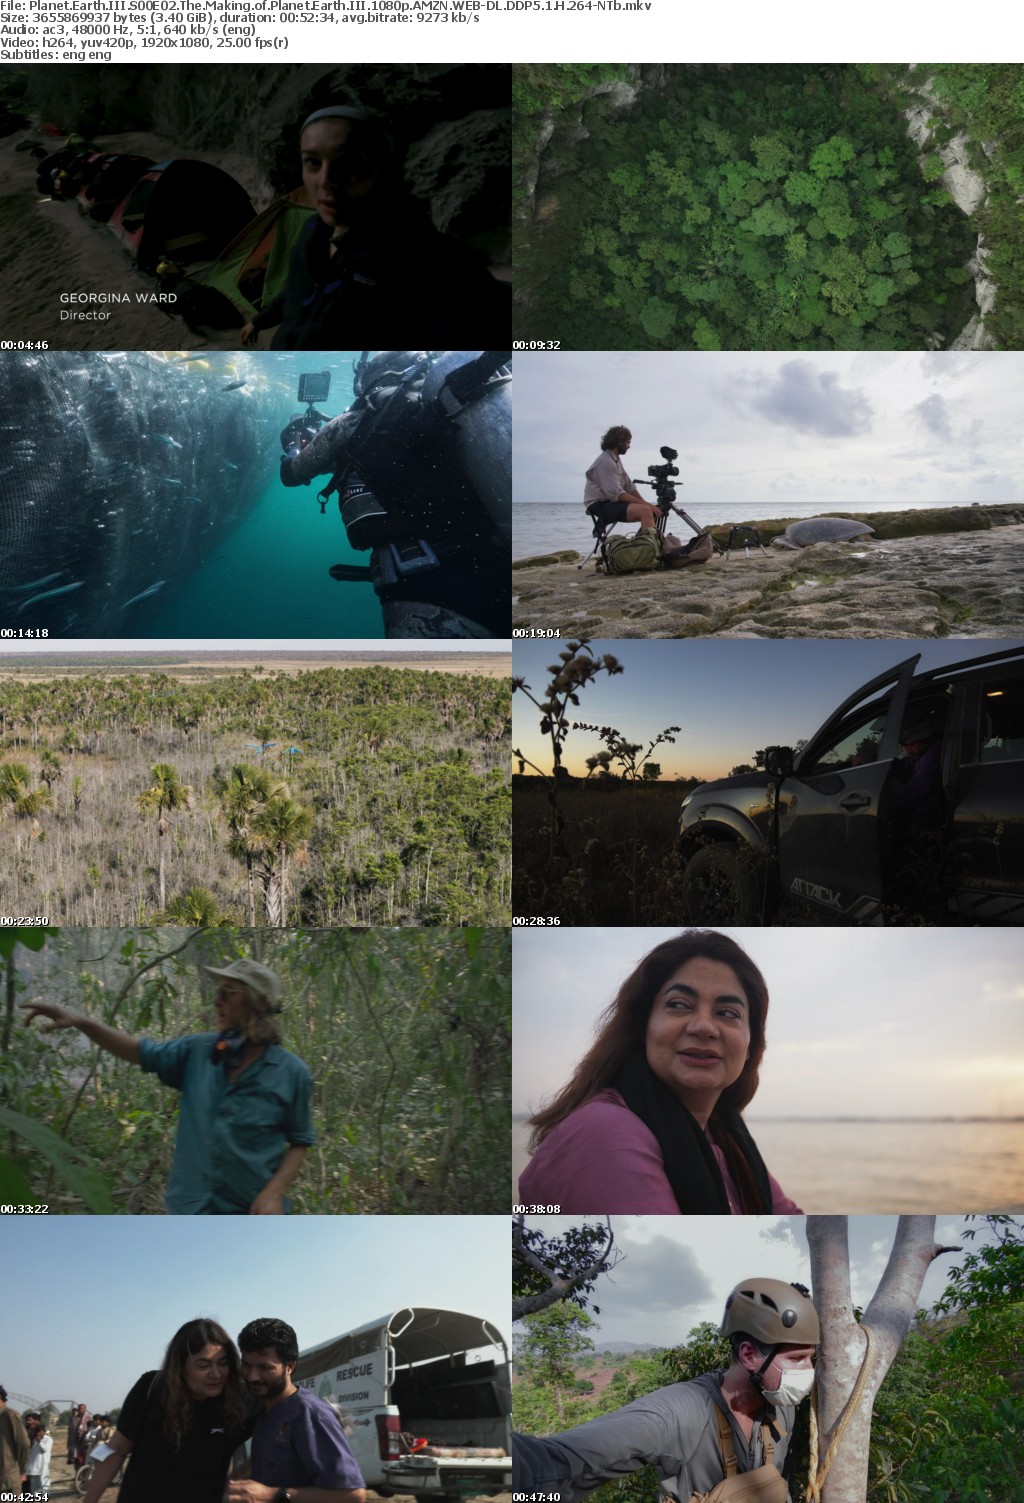 Planet Earth III S00E02 The Making of Planet Earth III 1080p AMZN WEB-DL DDP5 1 H 264-NTb